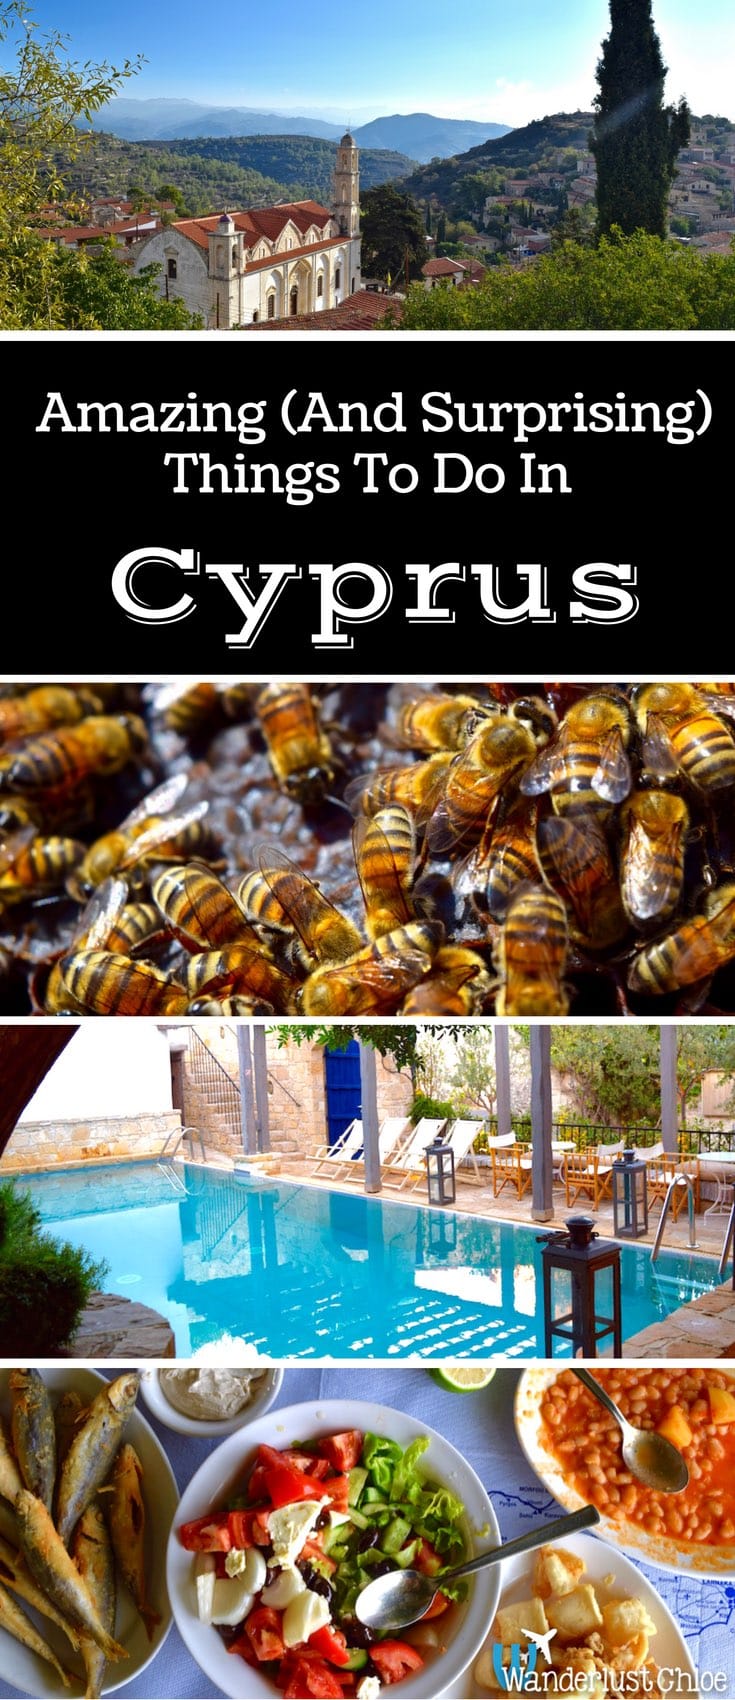 7 Amazing (And Surprising) Things To Do In Cyprus